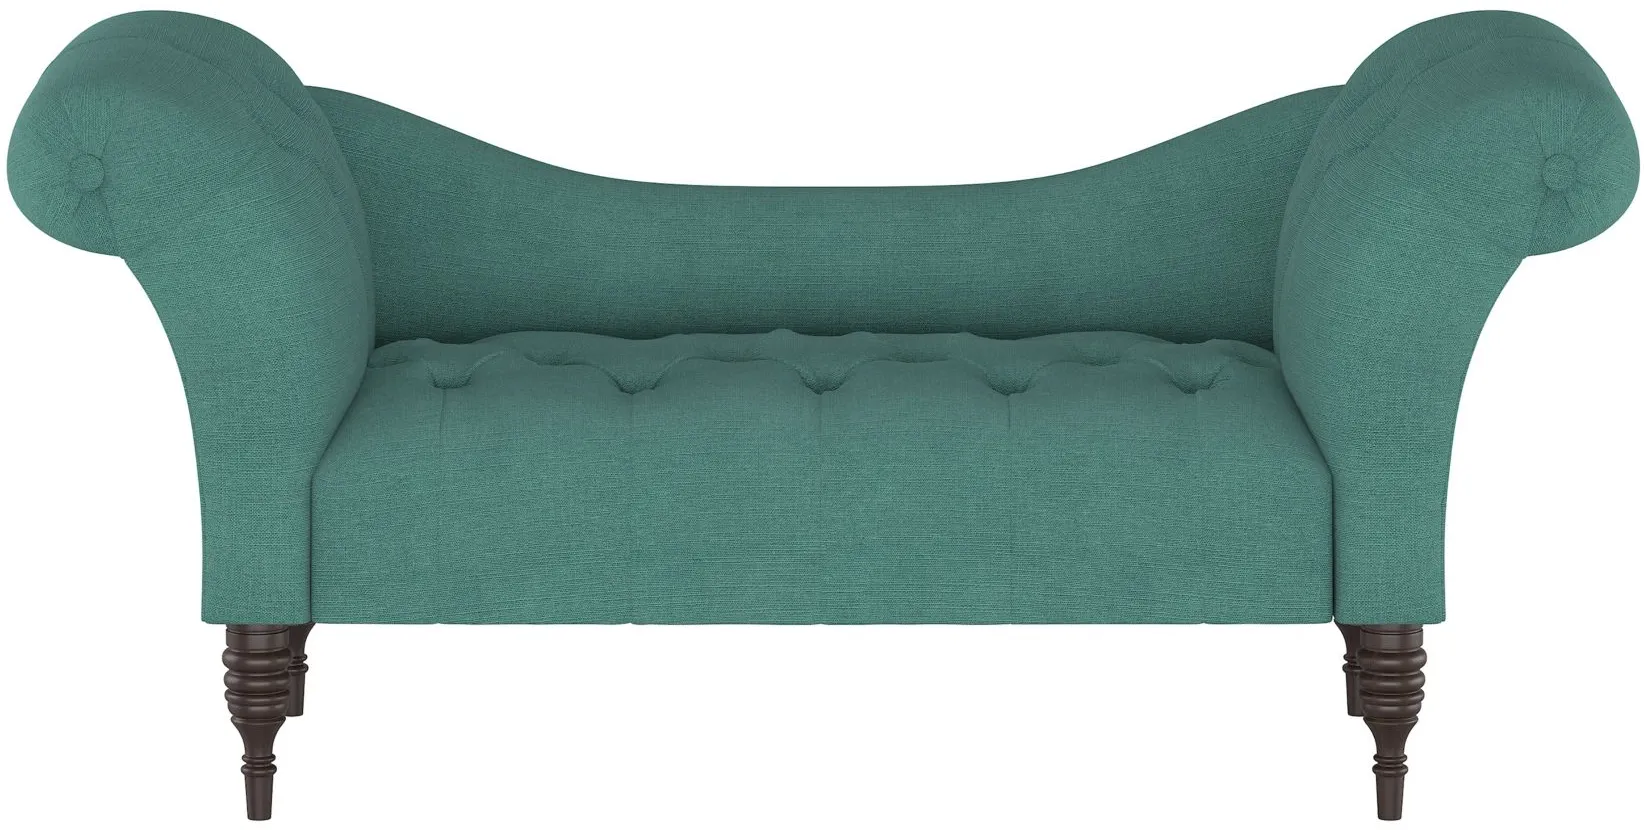 Lansing Chaise Lounge in Linen Laguna by Skyline